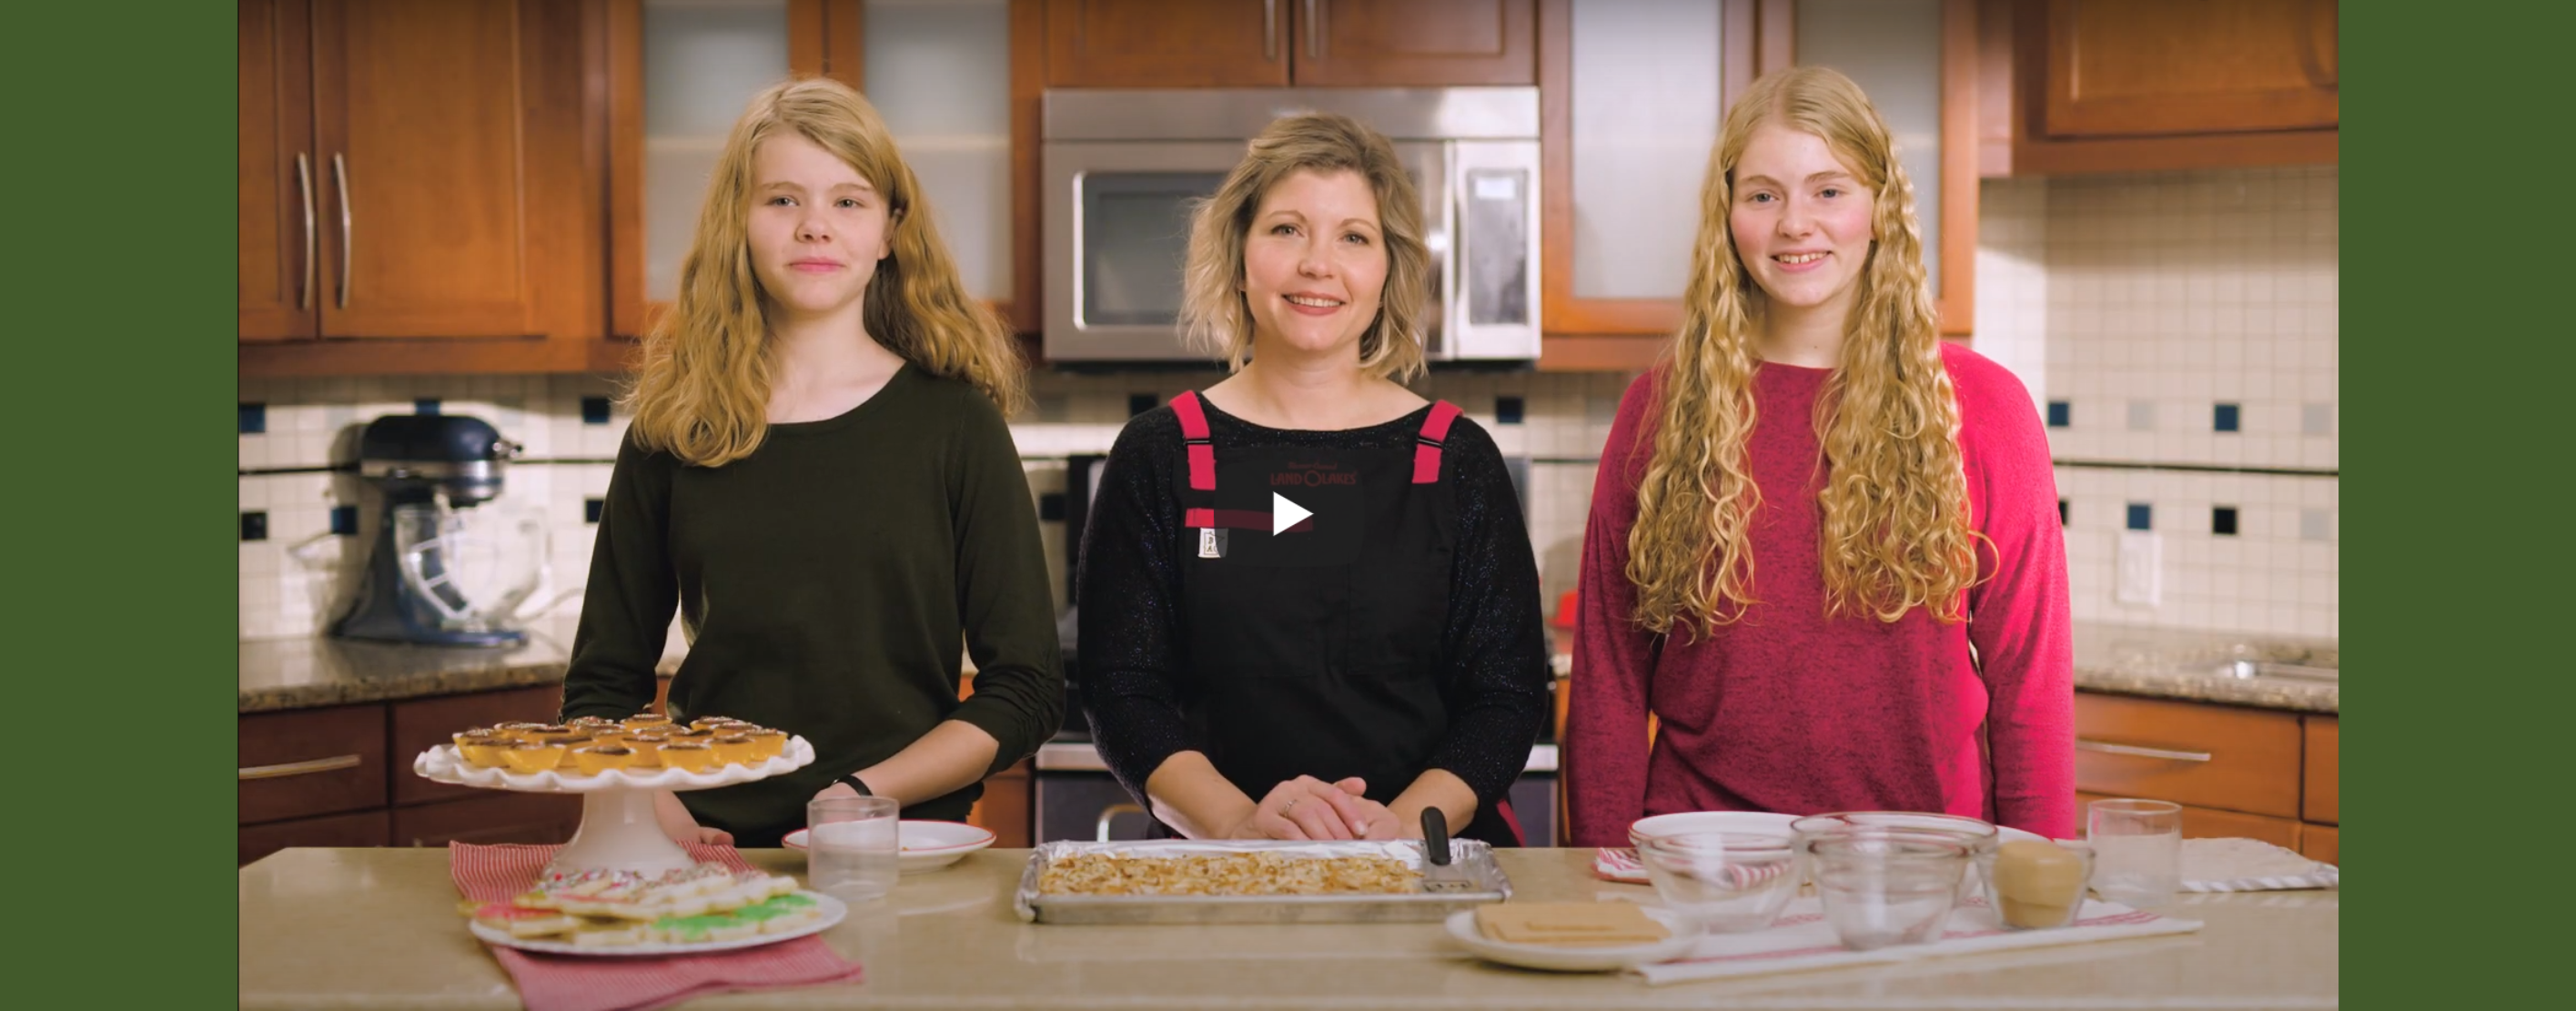 Sadie Frericks and her two daughters in a kitchen